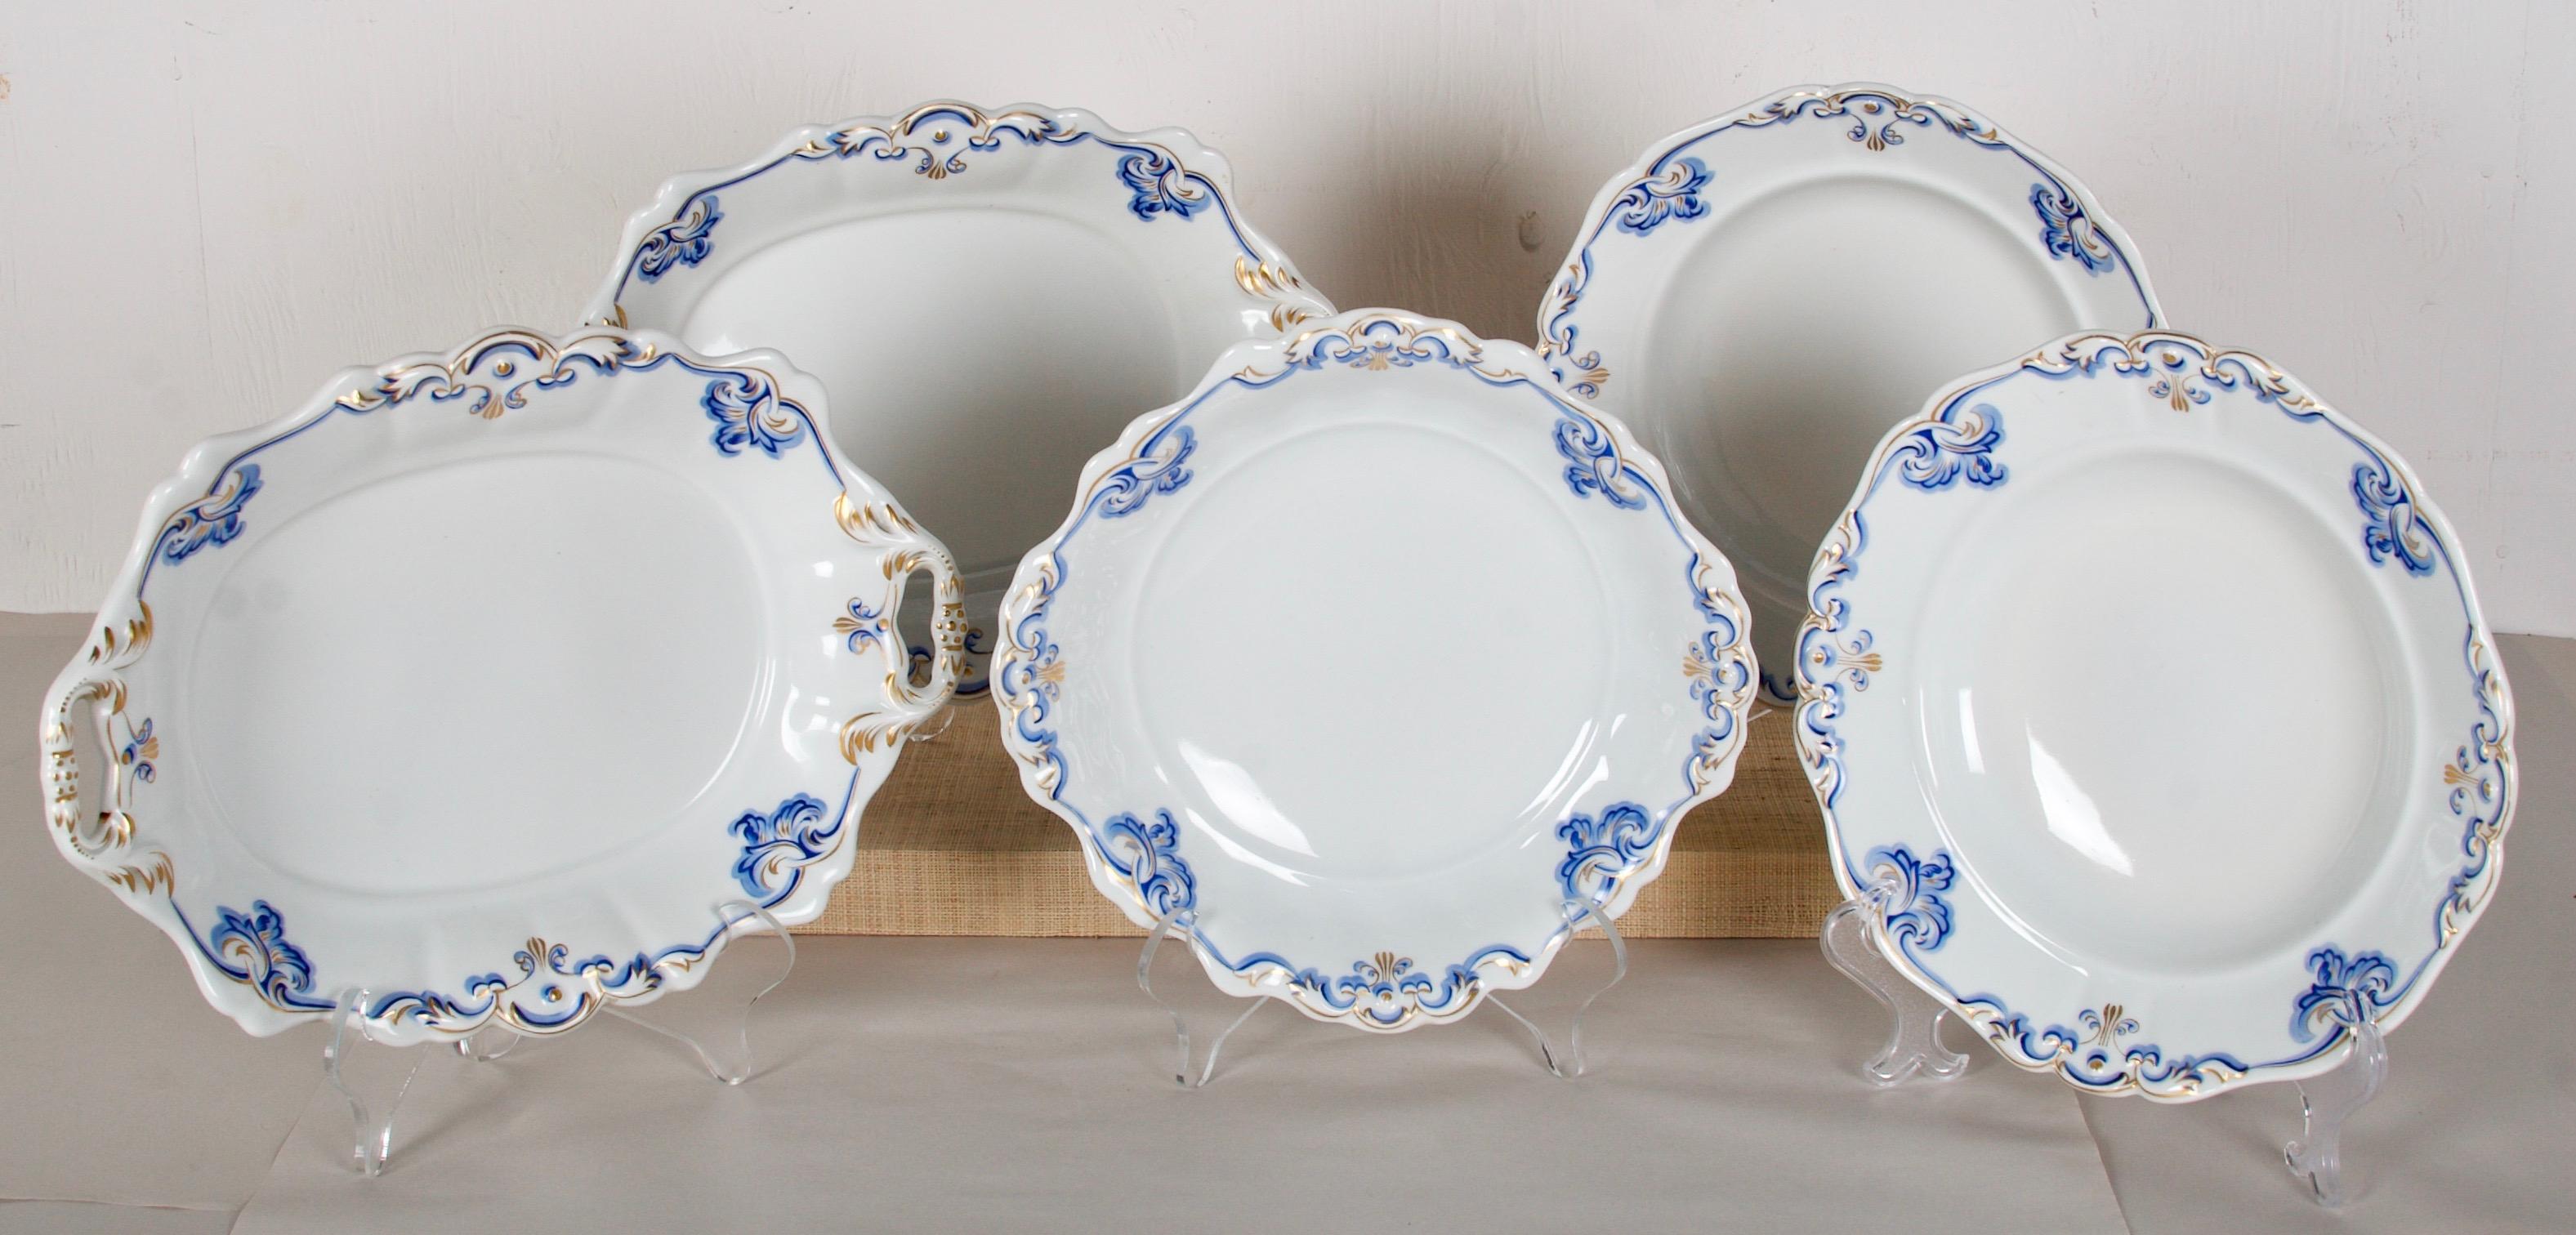 Mid-19th Century 1851 Imperial Vienna Porcelain 27 piece Service for 18, very rare For Sale